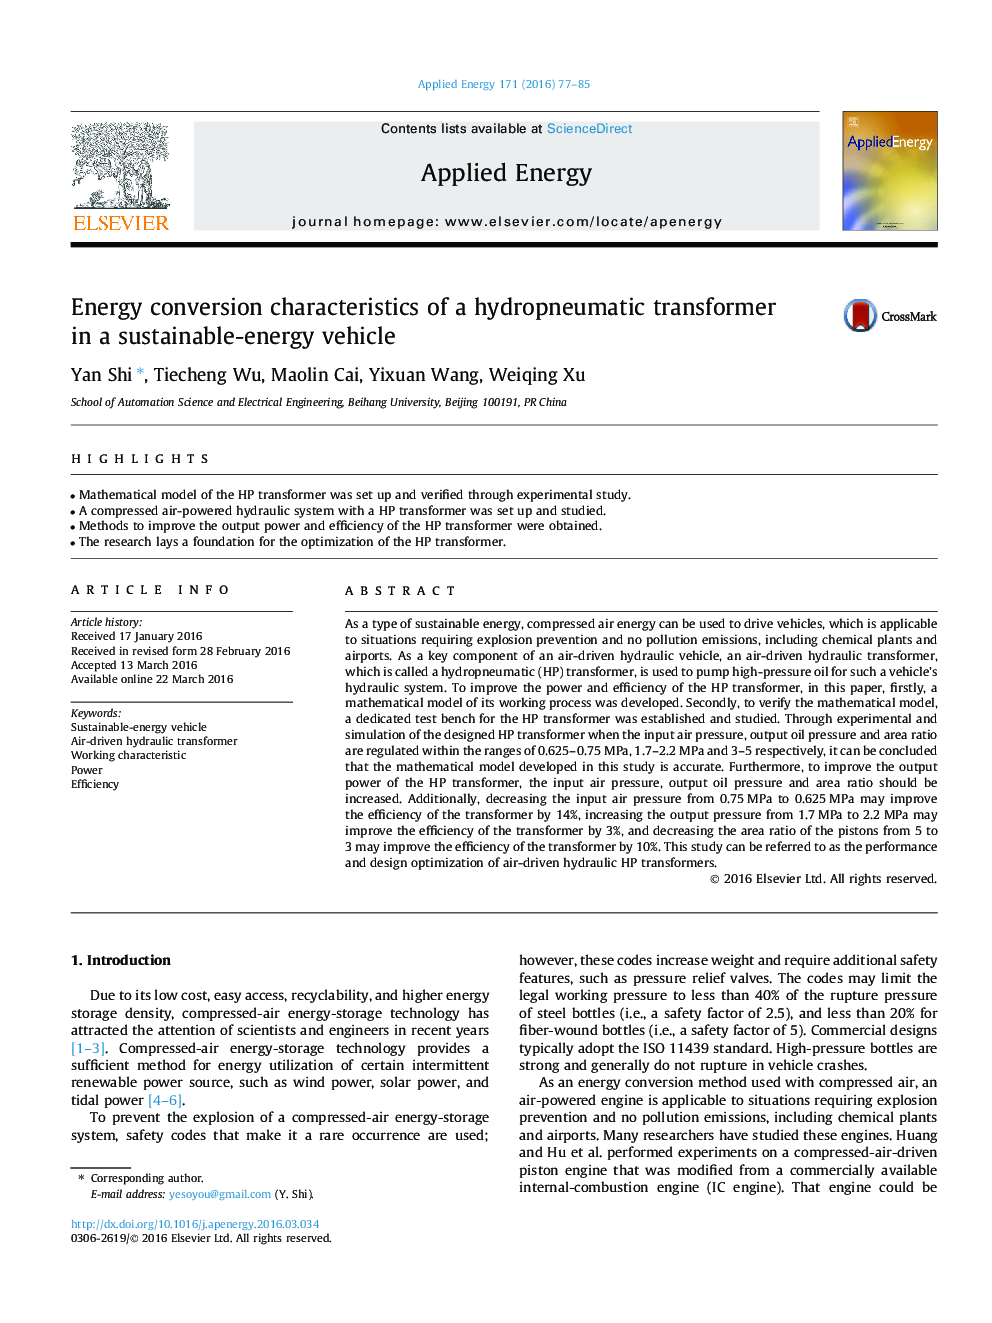 Energy conversion characteristics of a hydropneumatic transformer in a sustainable-energy vehicle